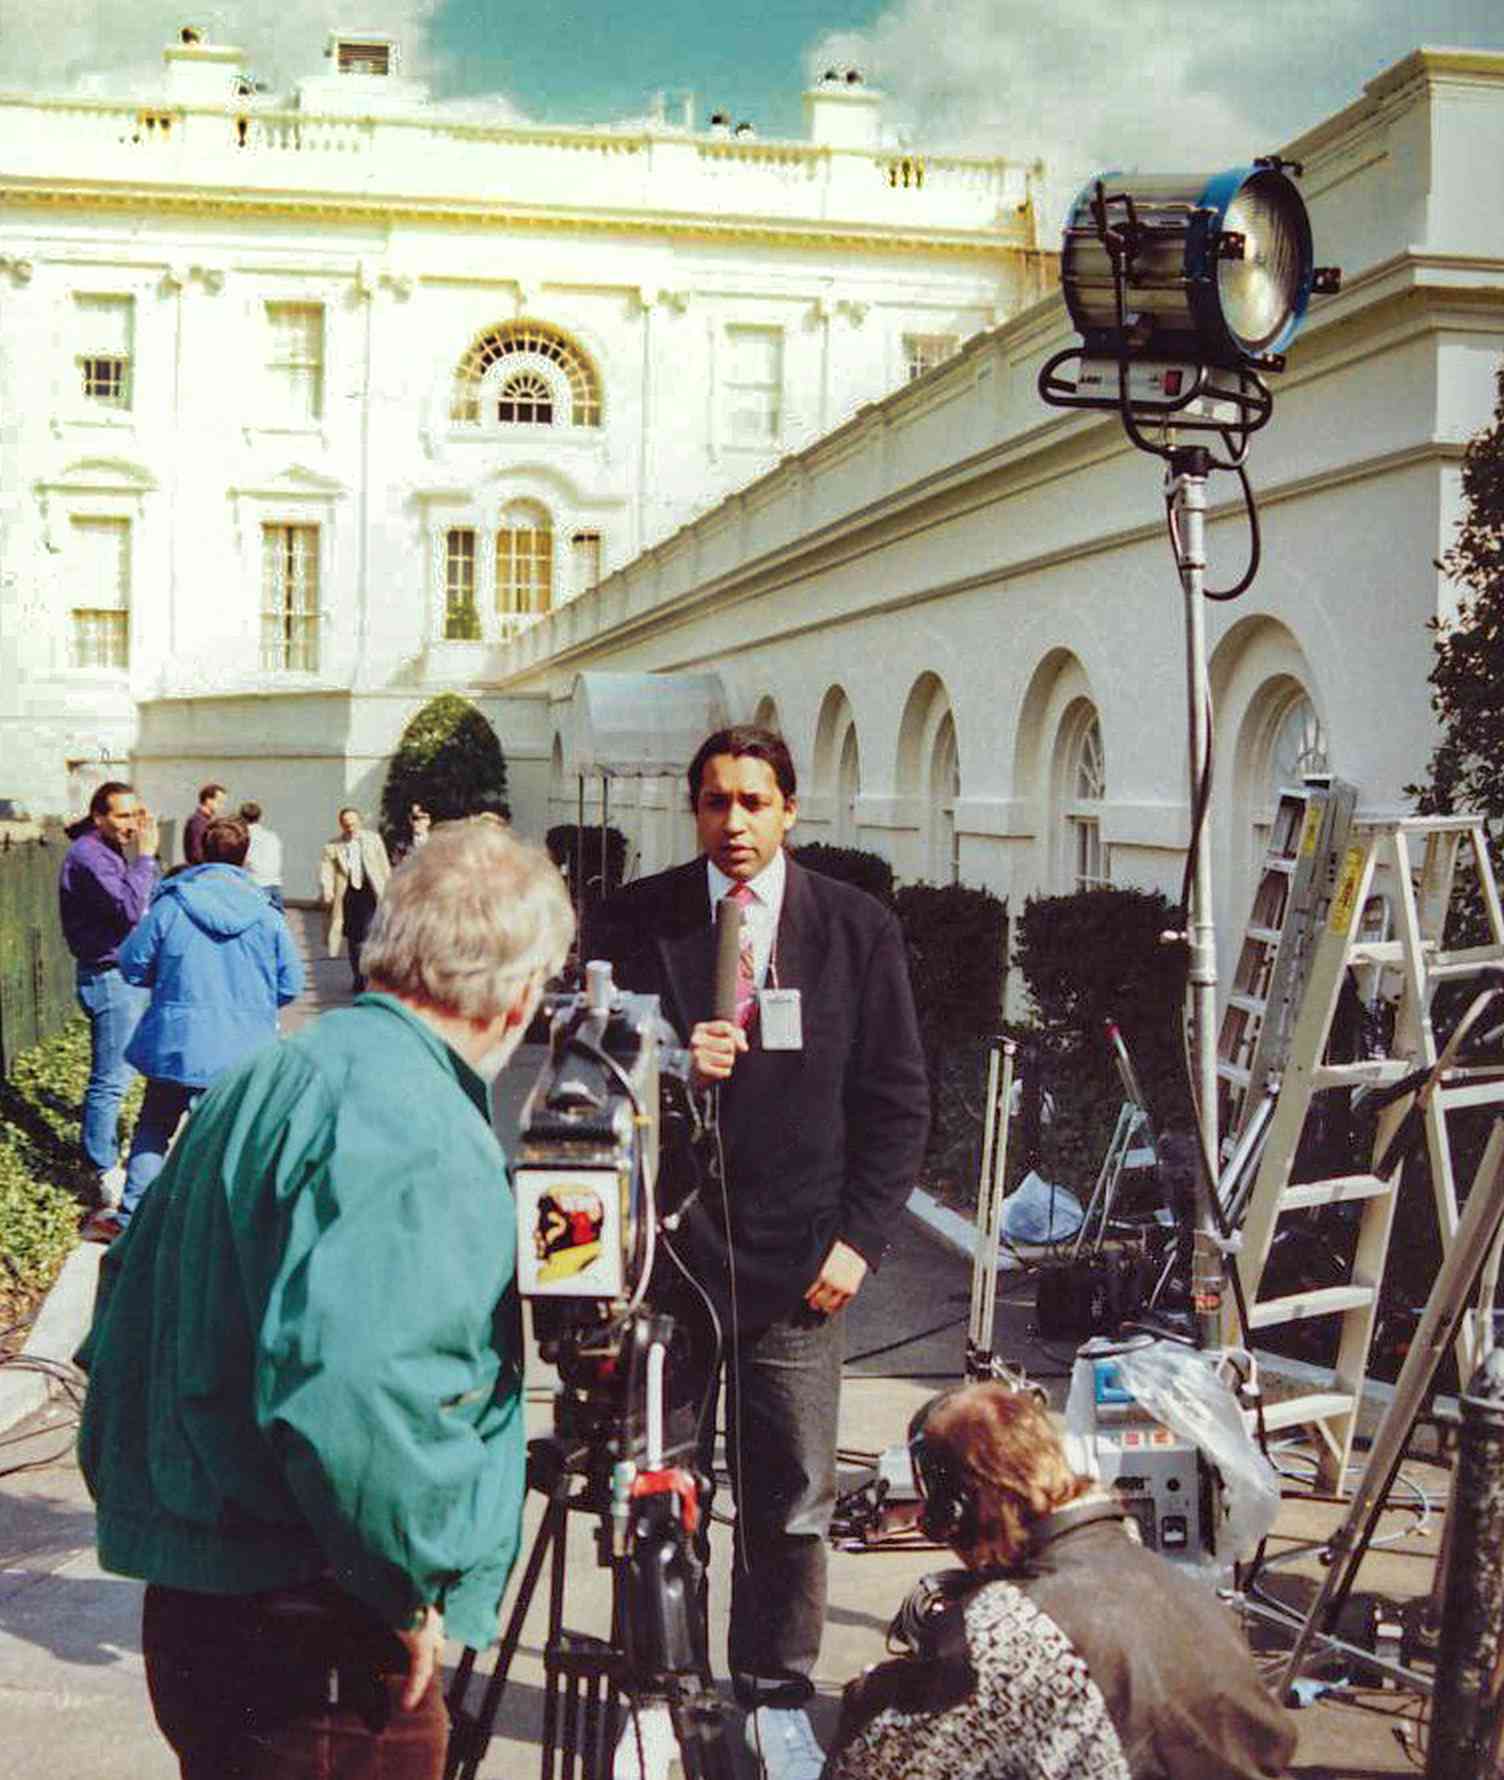 Cherno Jobatey is reporting in front of the West Wing White House Washington DC